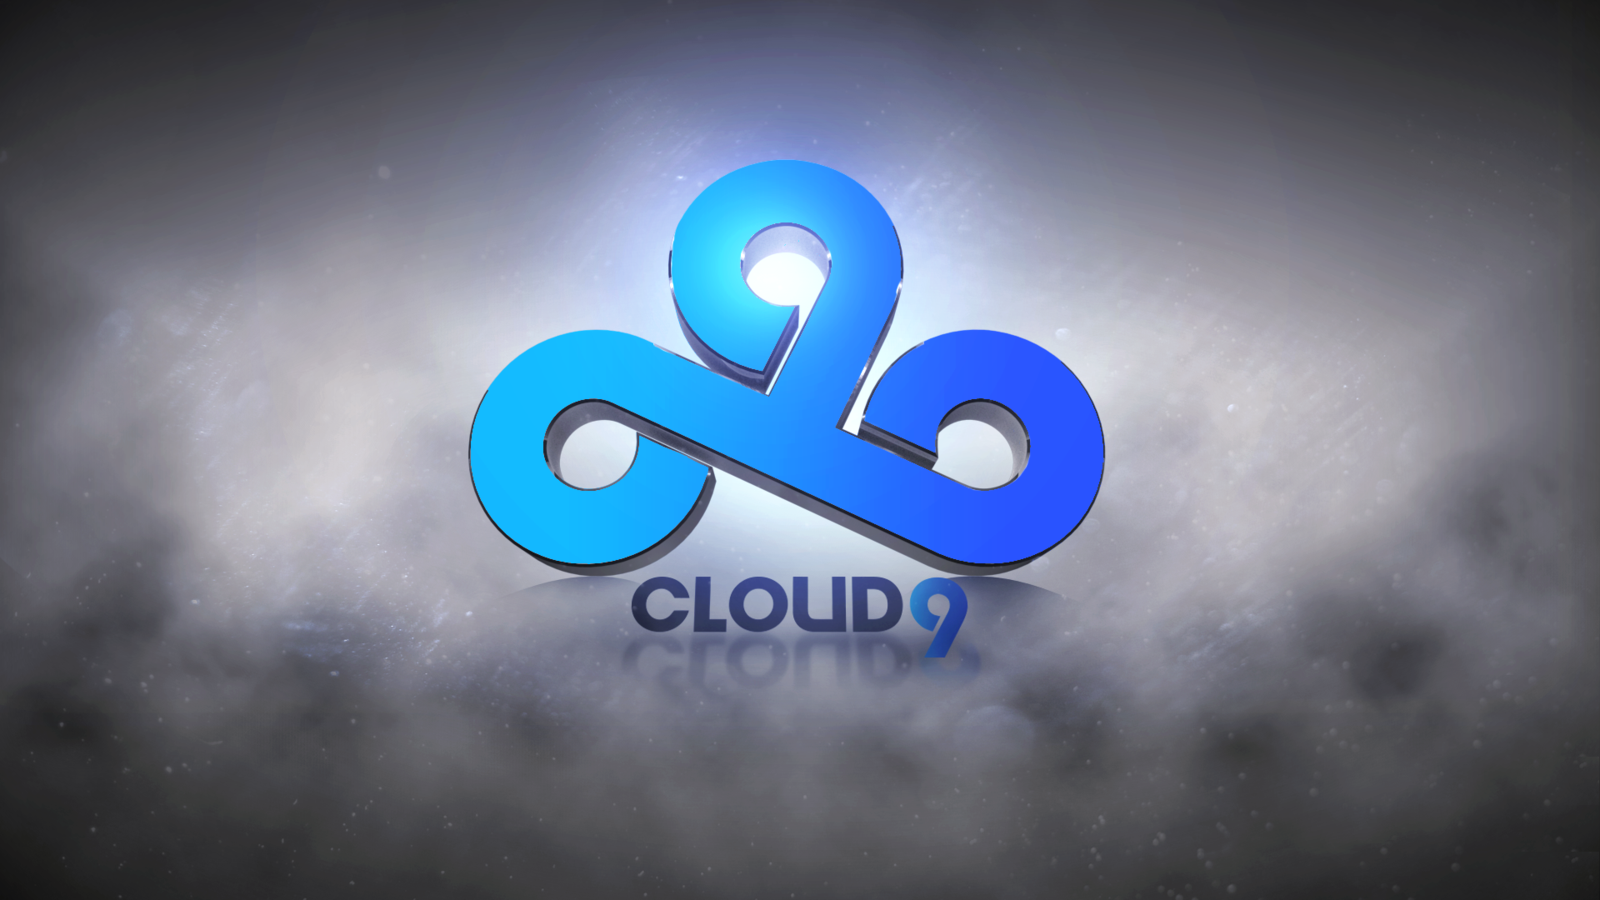 Cloud9 Wallpaper By Kayee3n Watch Customization Abstract